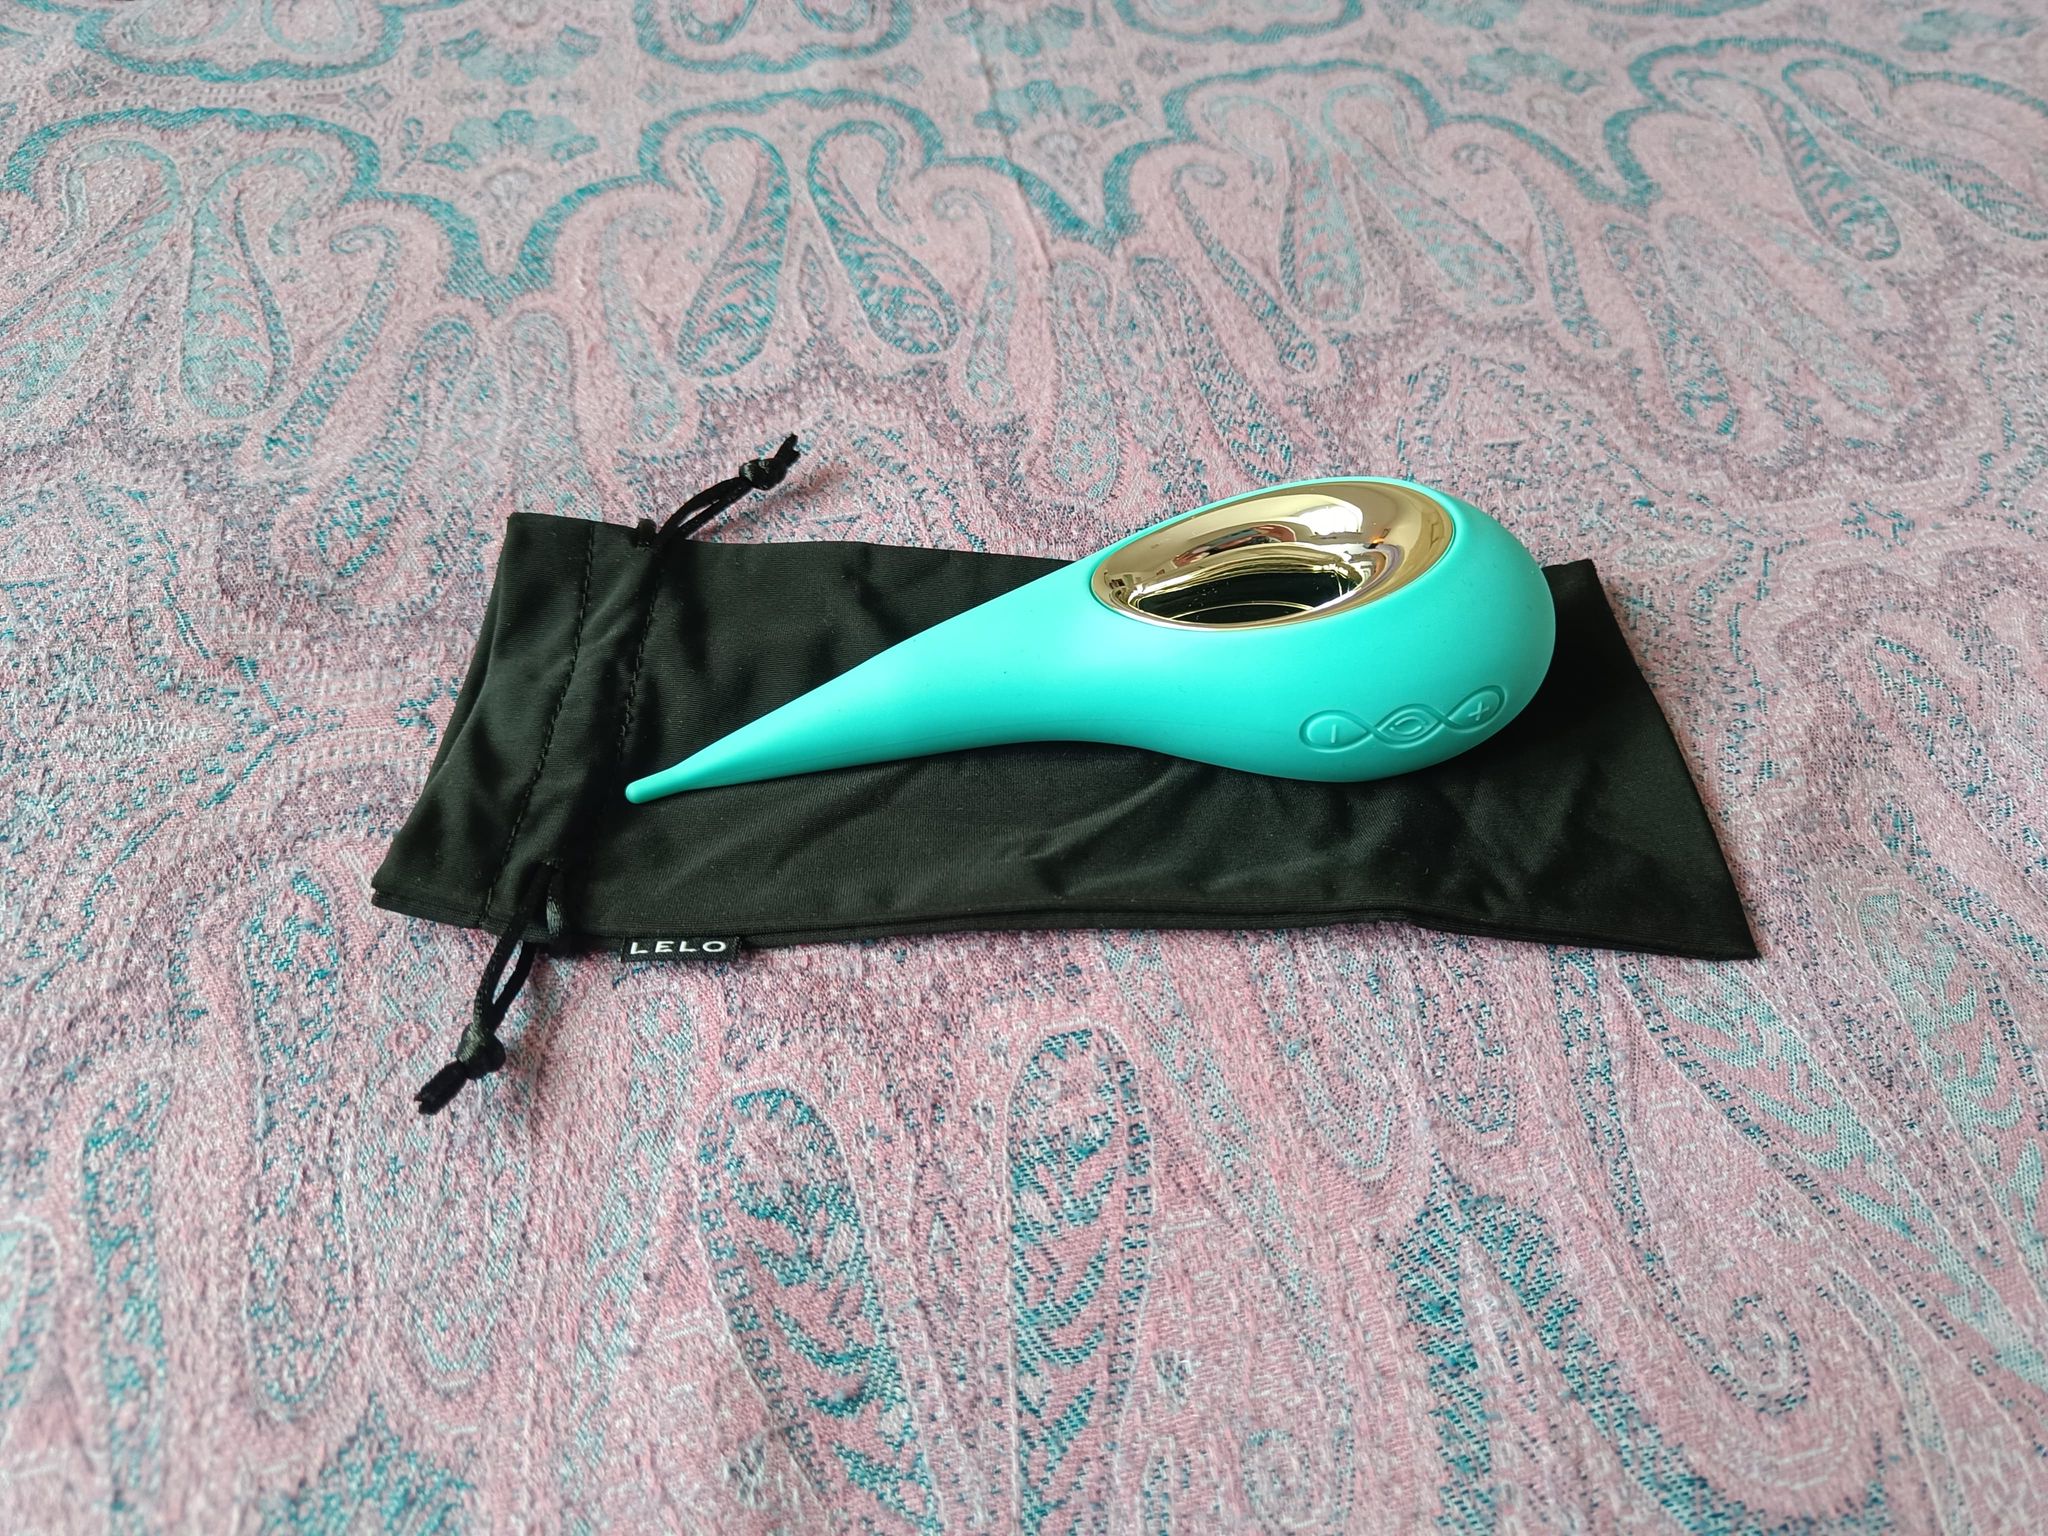 Lelo Dot Review of the Quality